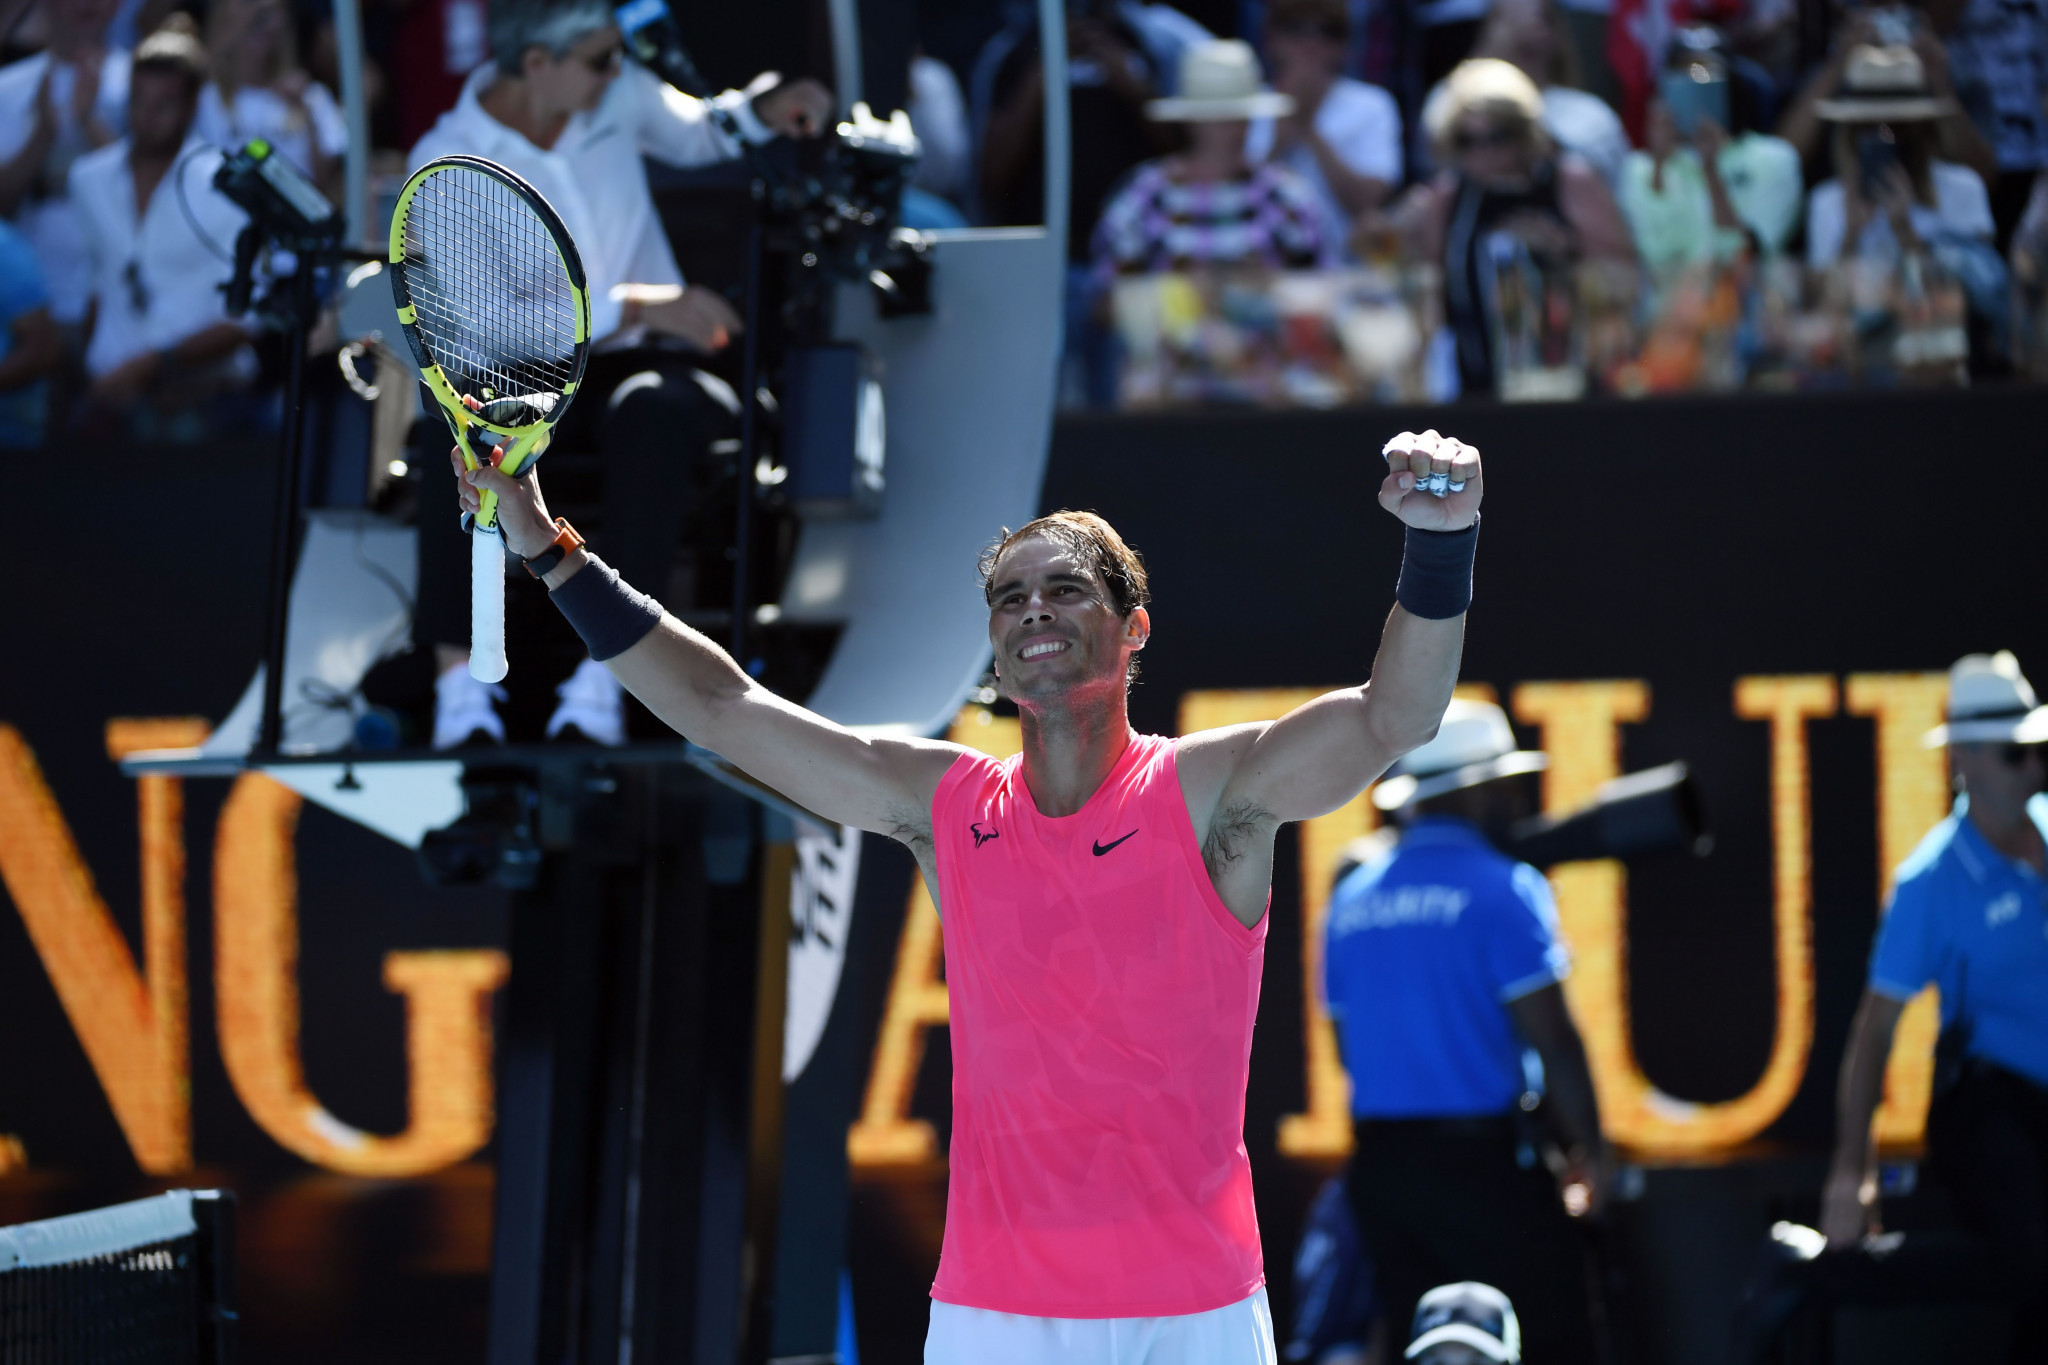 World number one Rafael Nadal eased through in Melbourne ©Getty Images